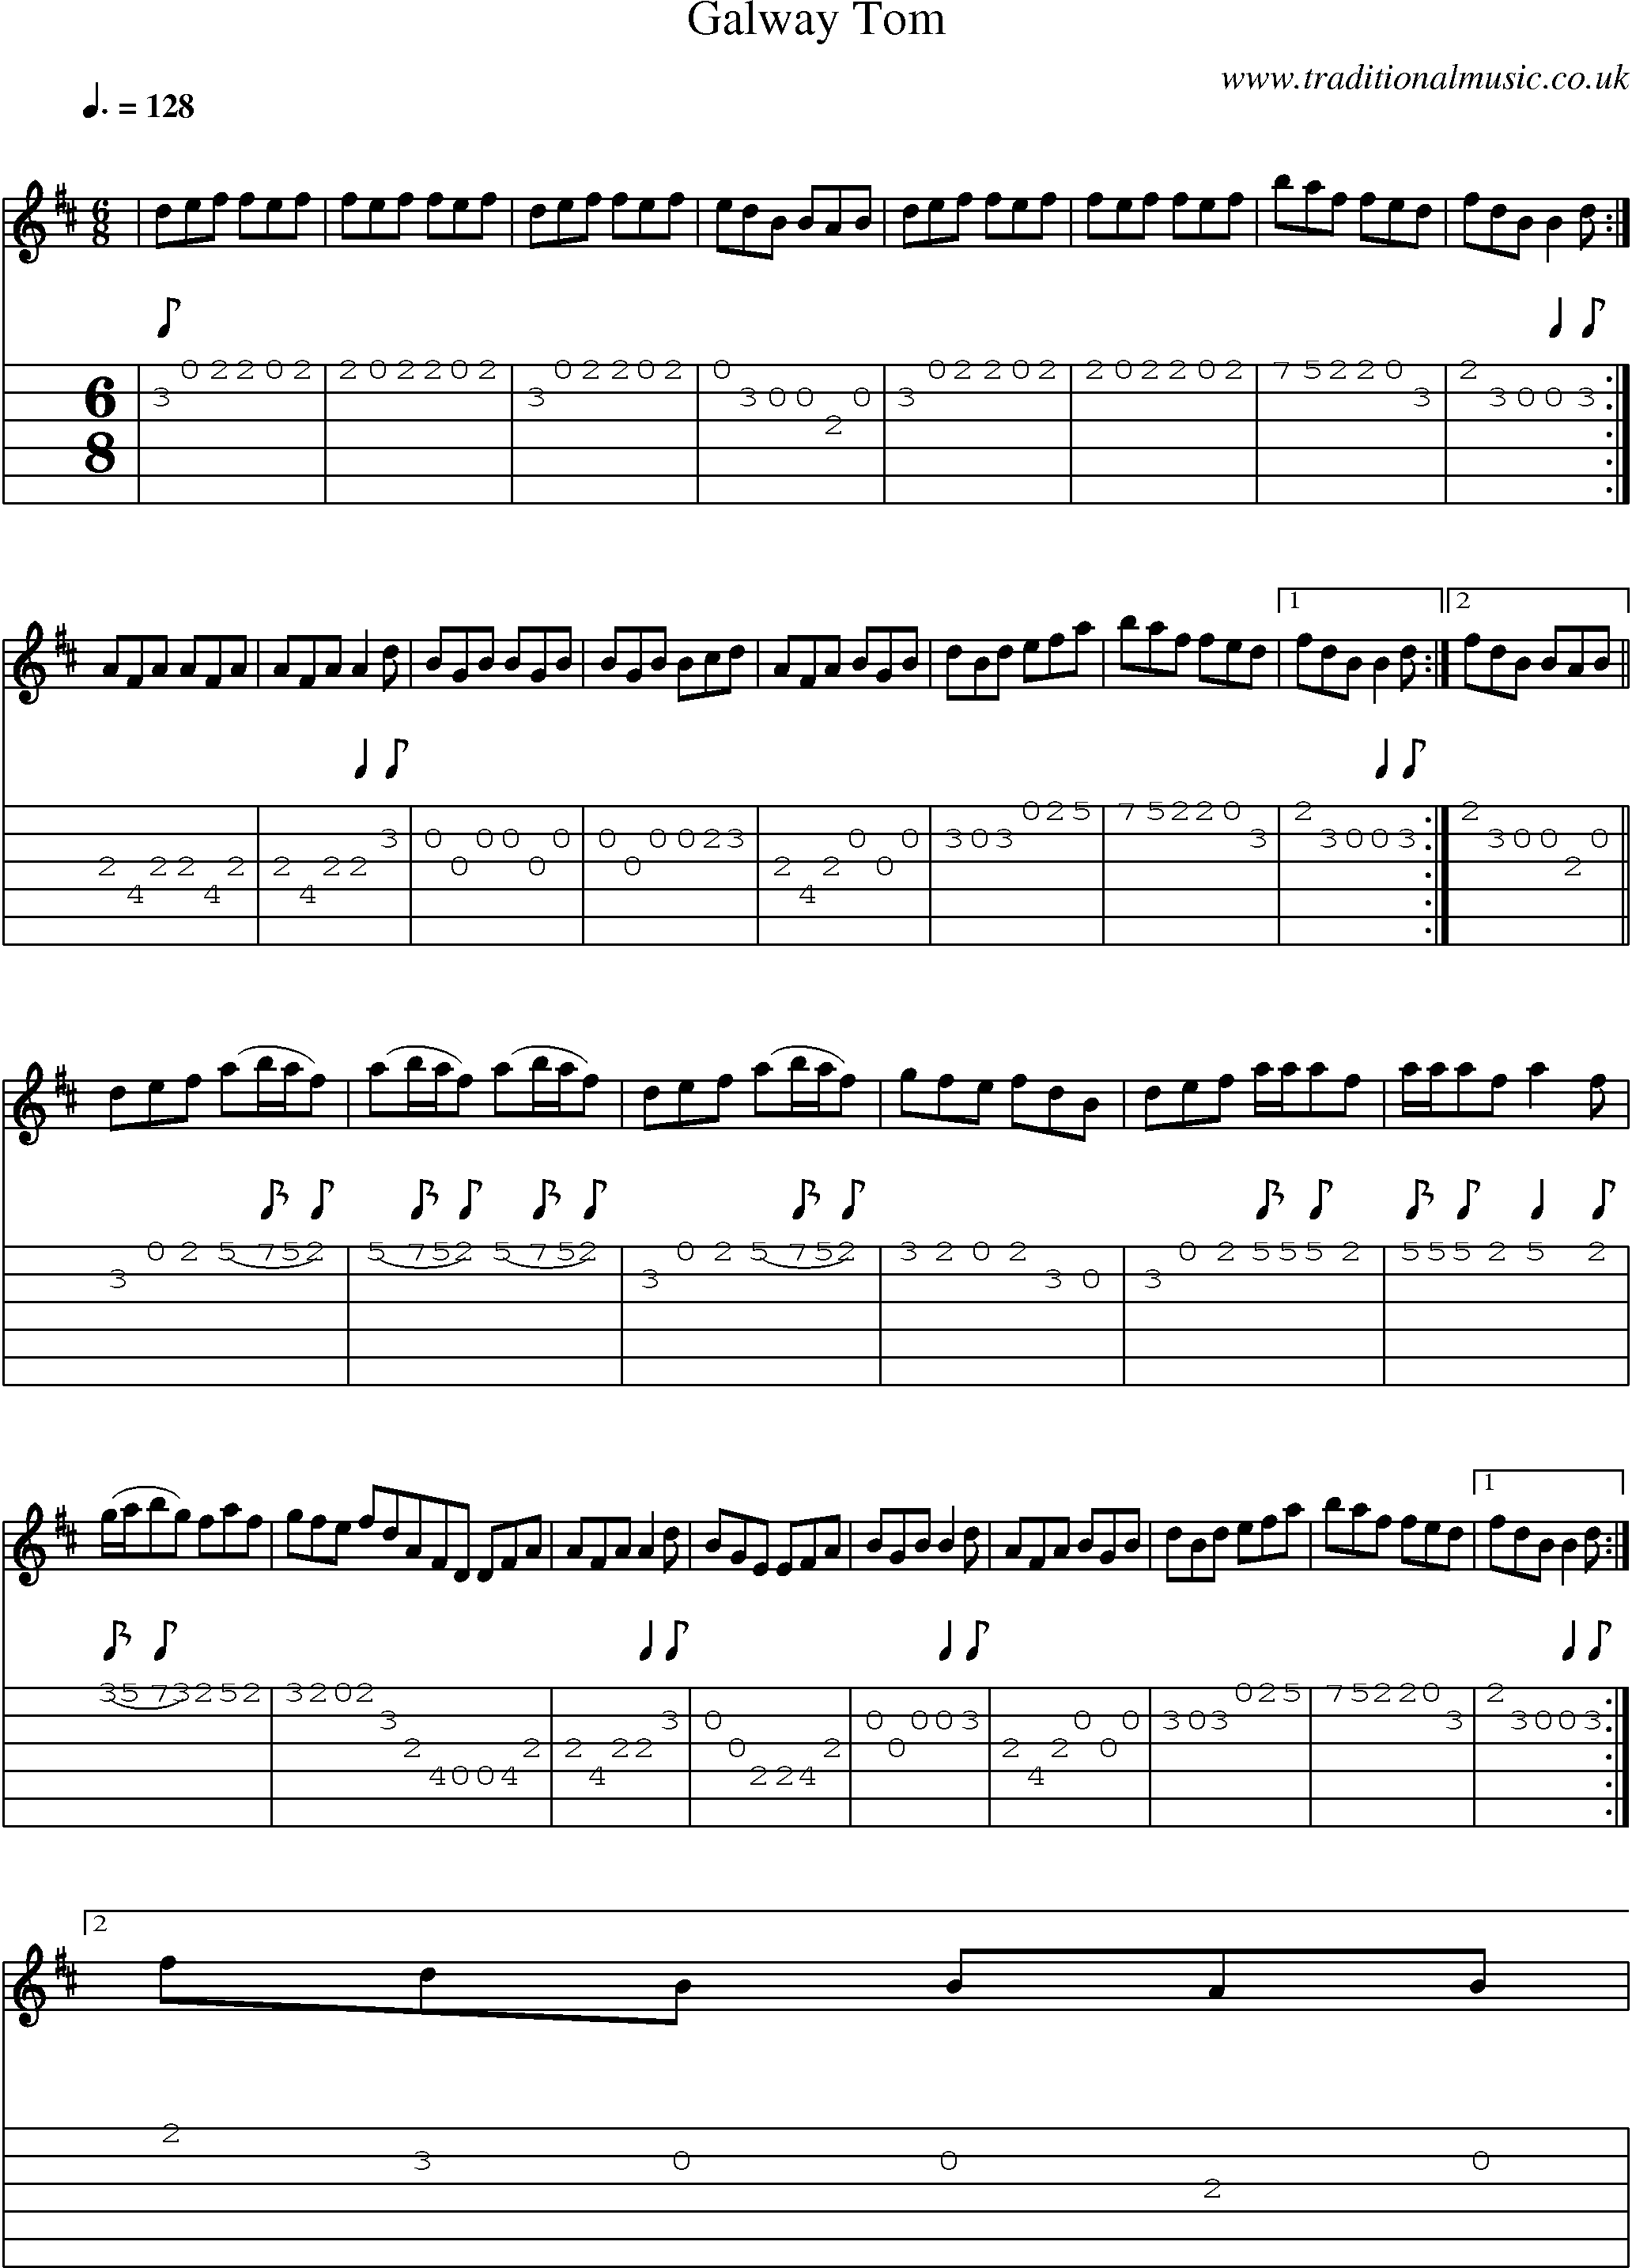 Music Score and Guitar Tabs for Galway Tom